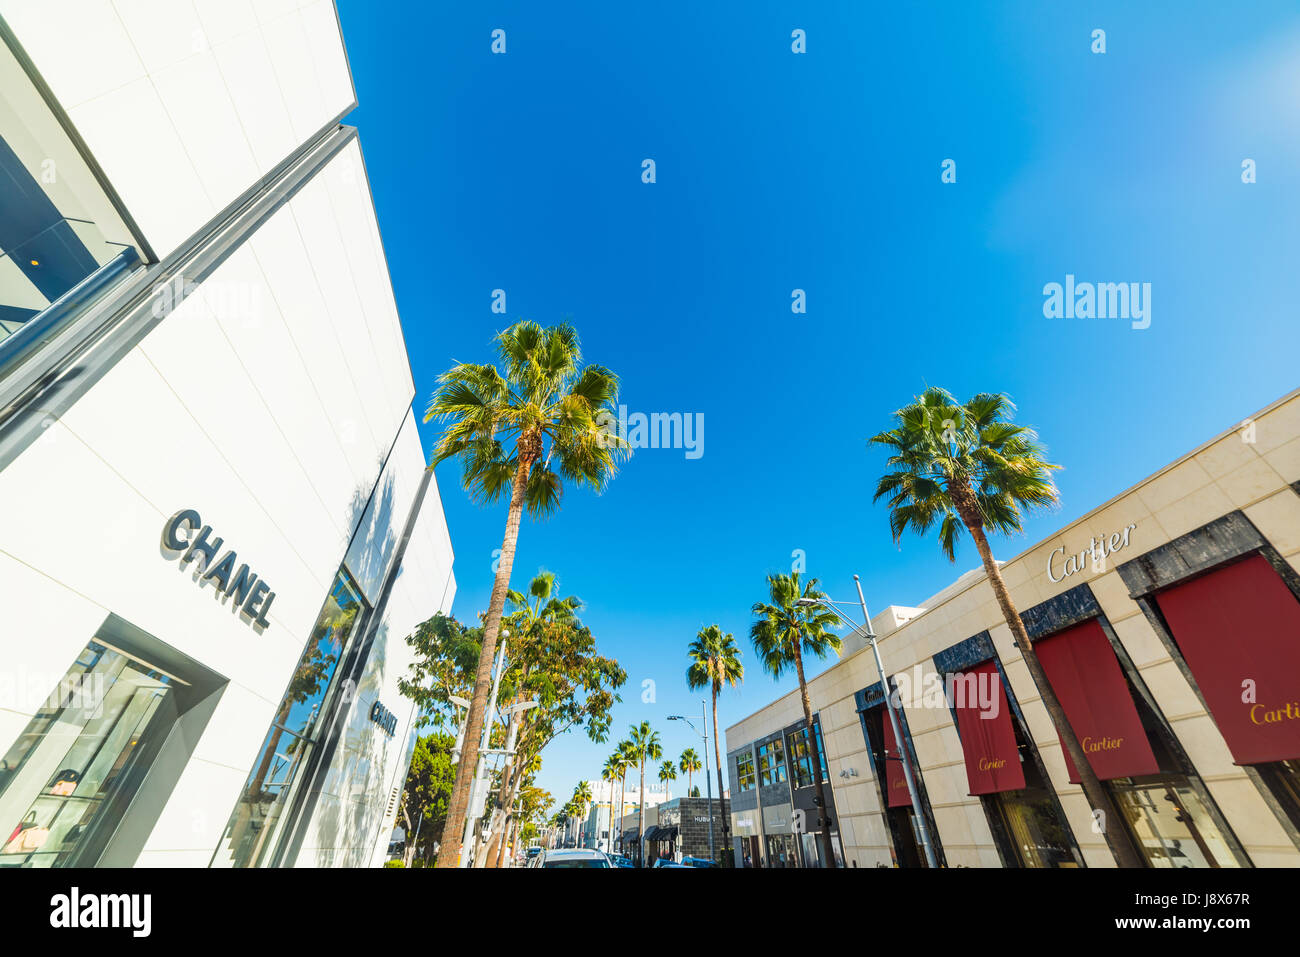 Chanel stores hi-res stock photography and images - Alamy